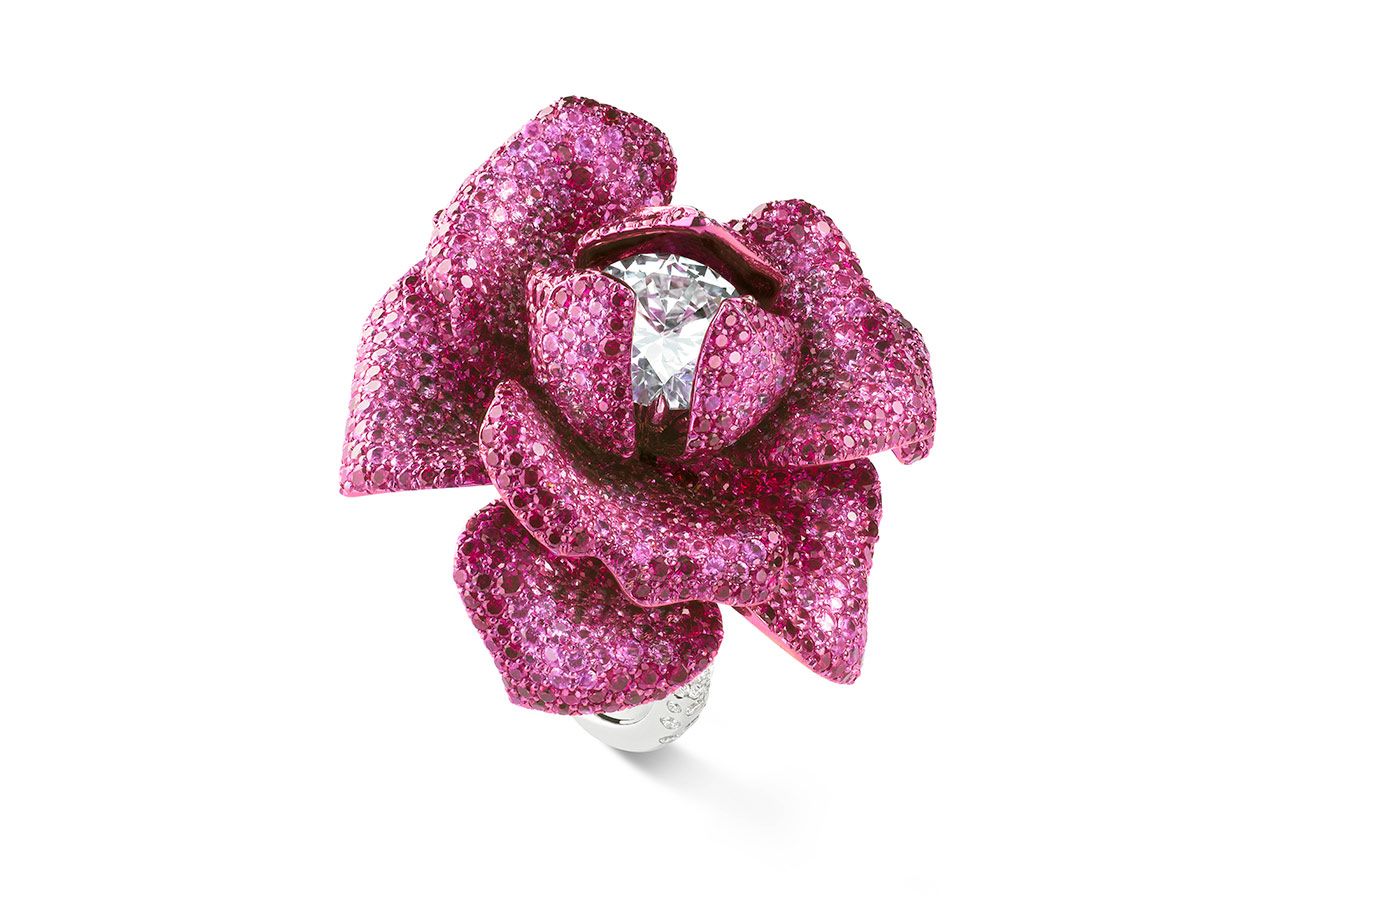 Chopard Loves Cinema: Up Close and Personal with New High Jewellery